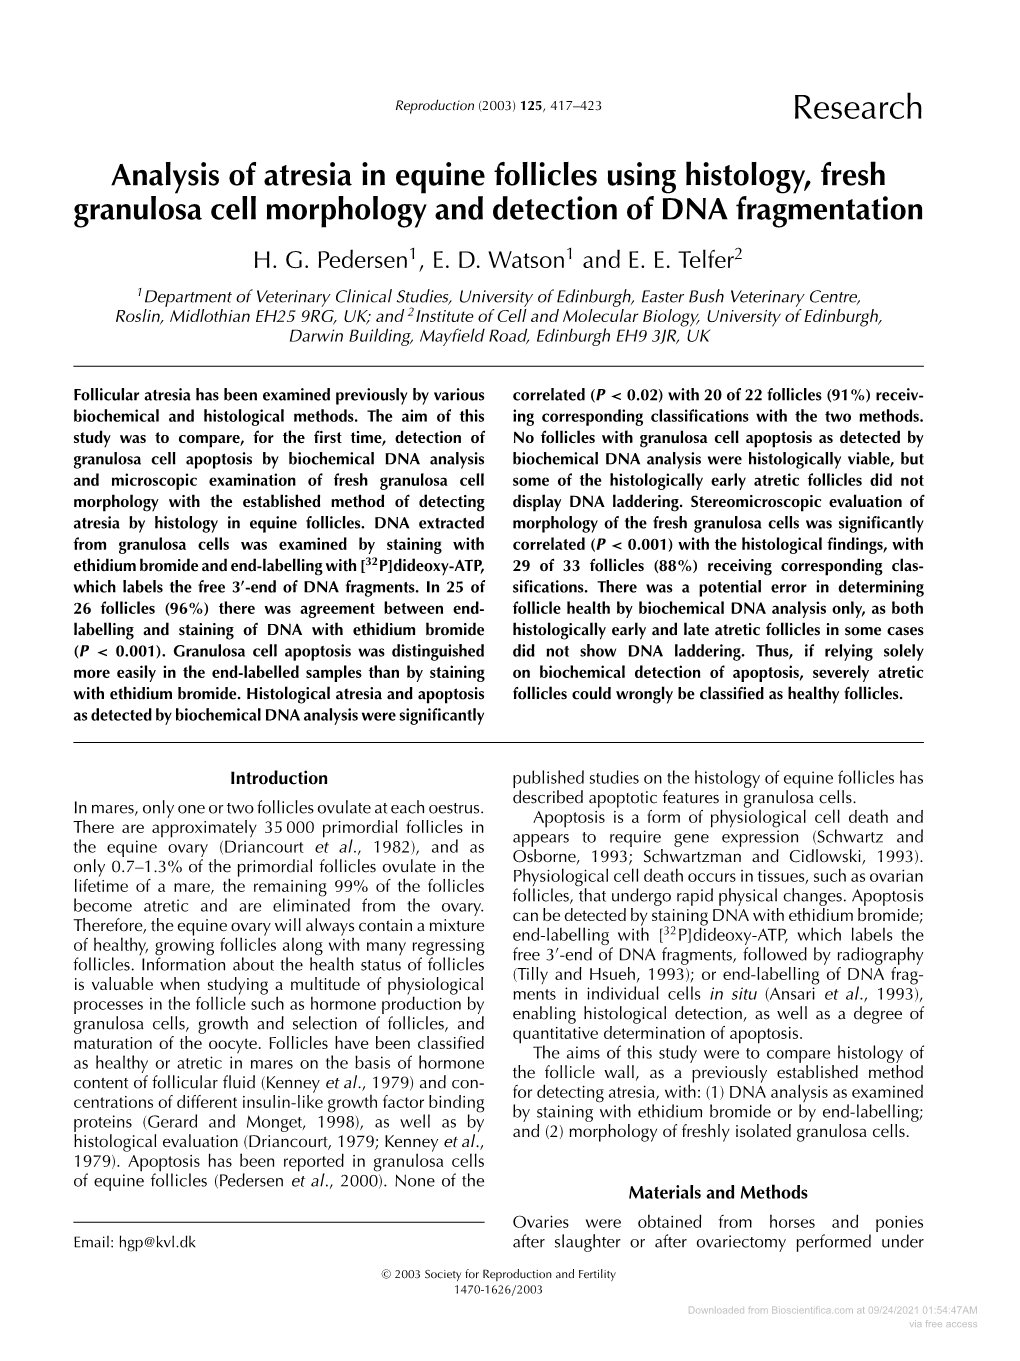 Analysis of Atresia in Equine Follicles Using Histology, Fresh Granulosa Cell Morphology and Detection of DNA Fragmentation H